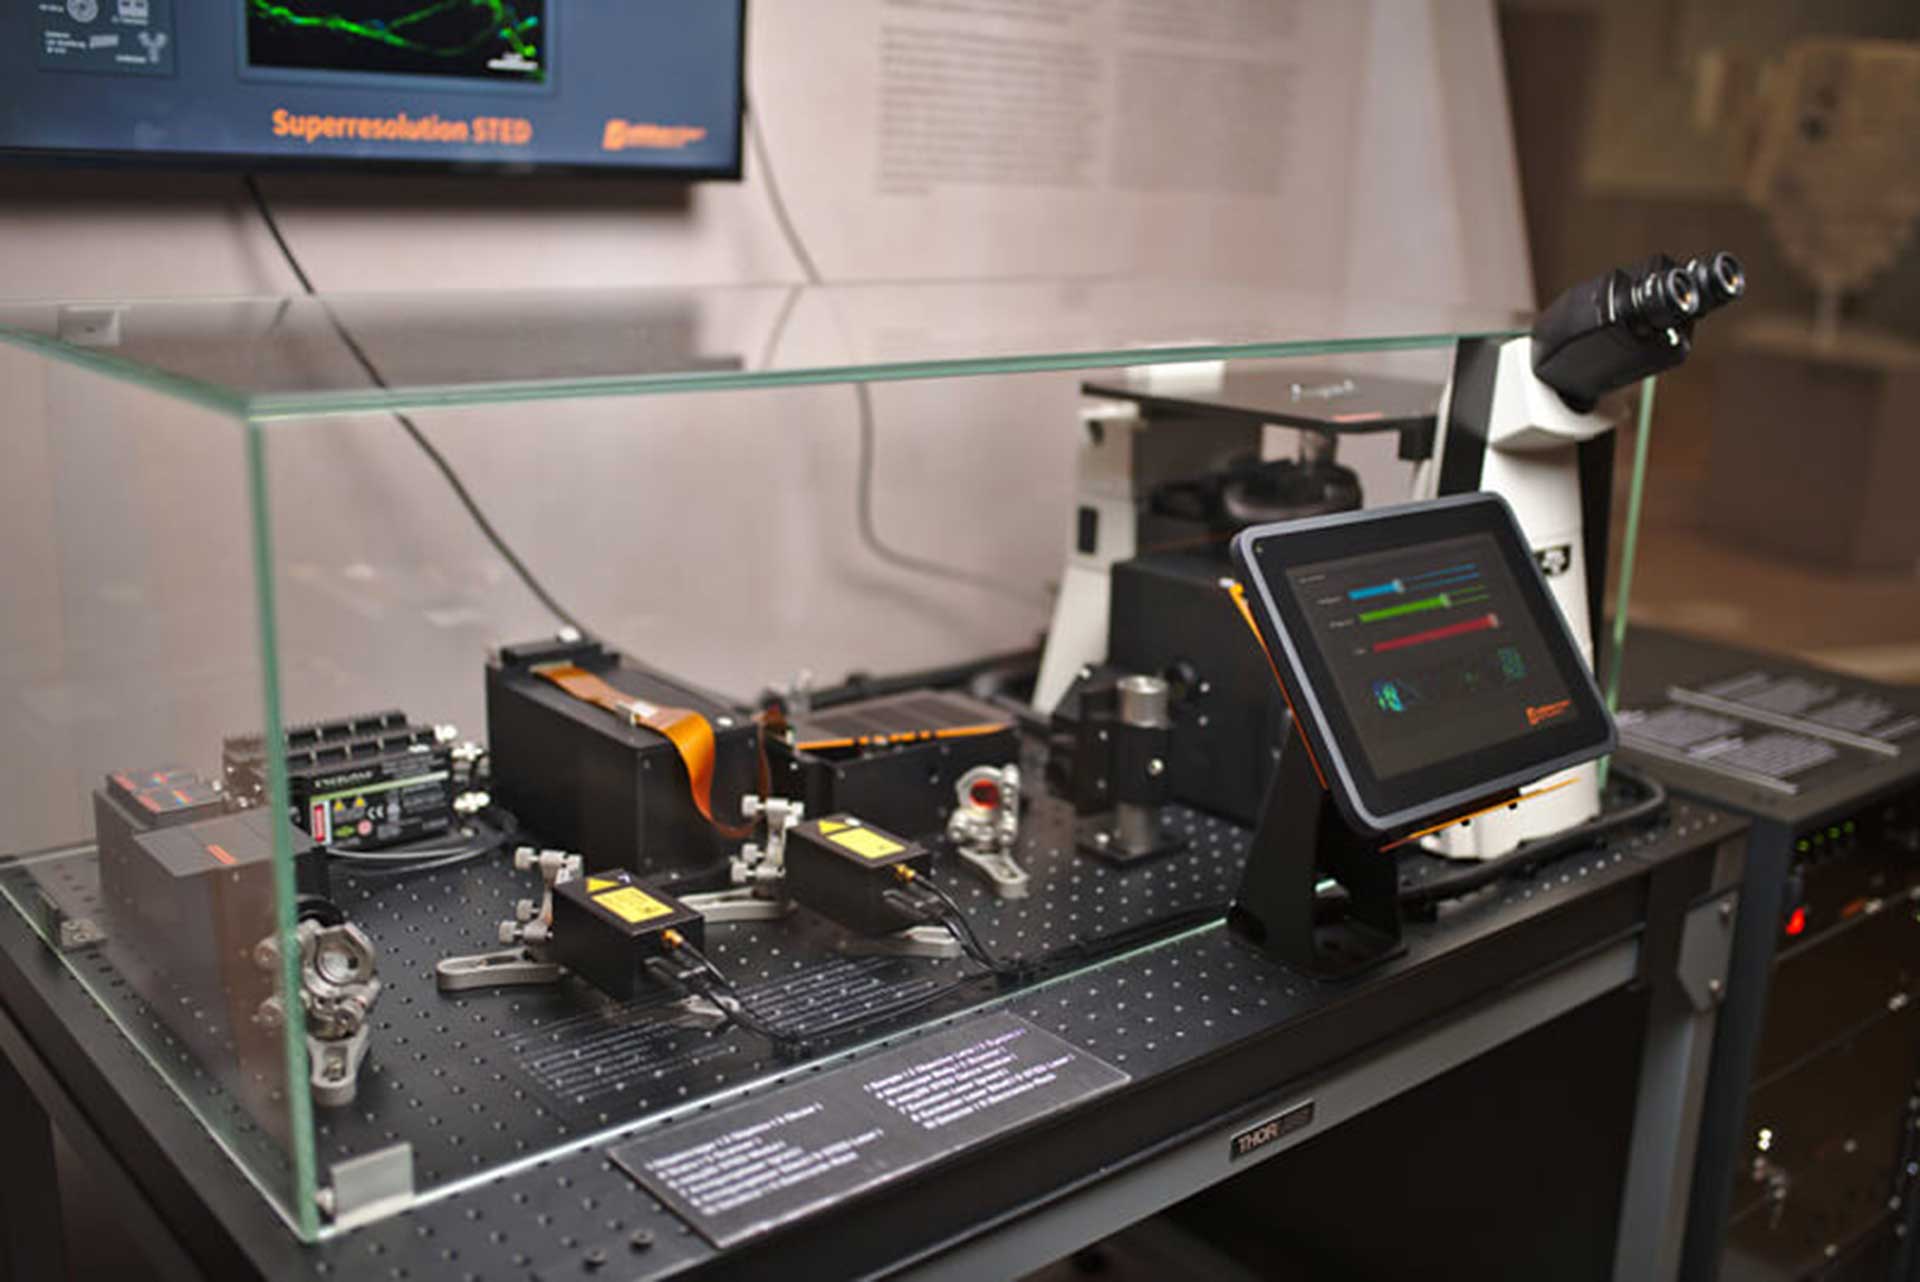 Transparent STED microscope as part of an exhibition with interactive surface